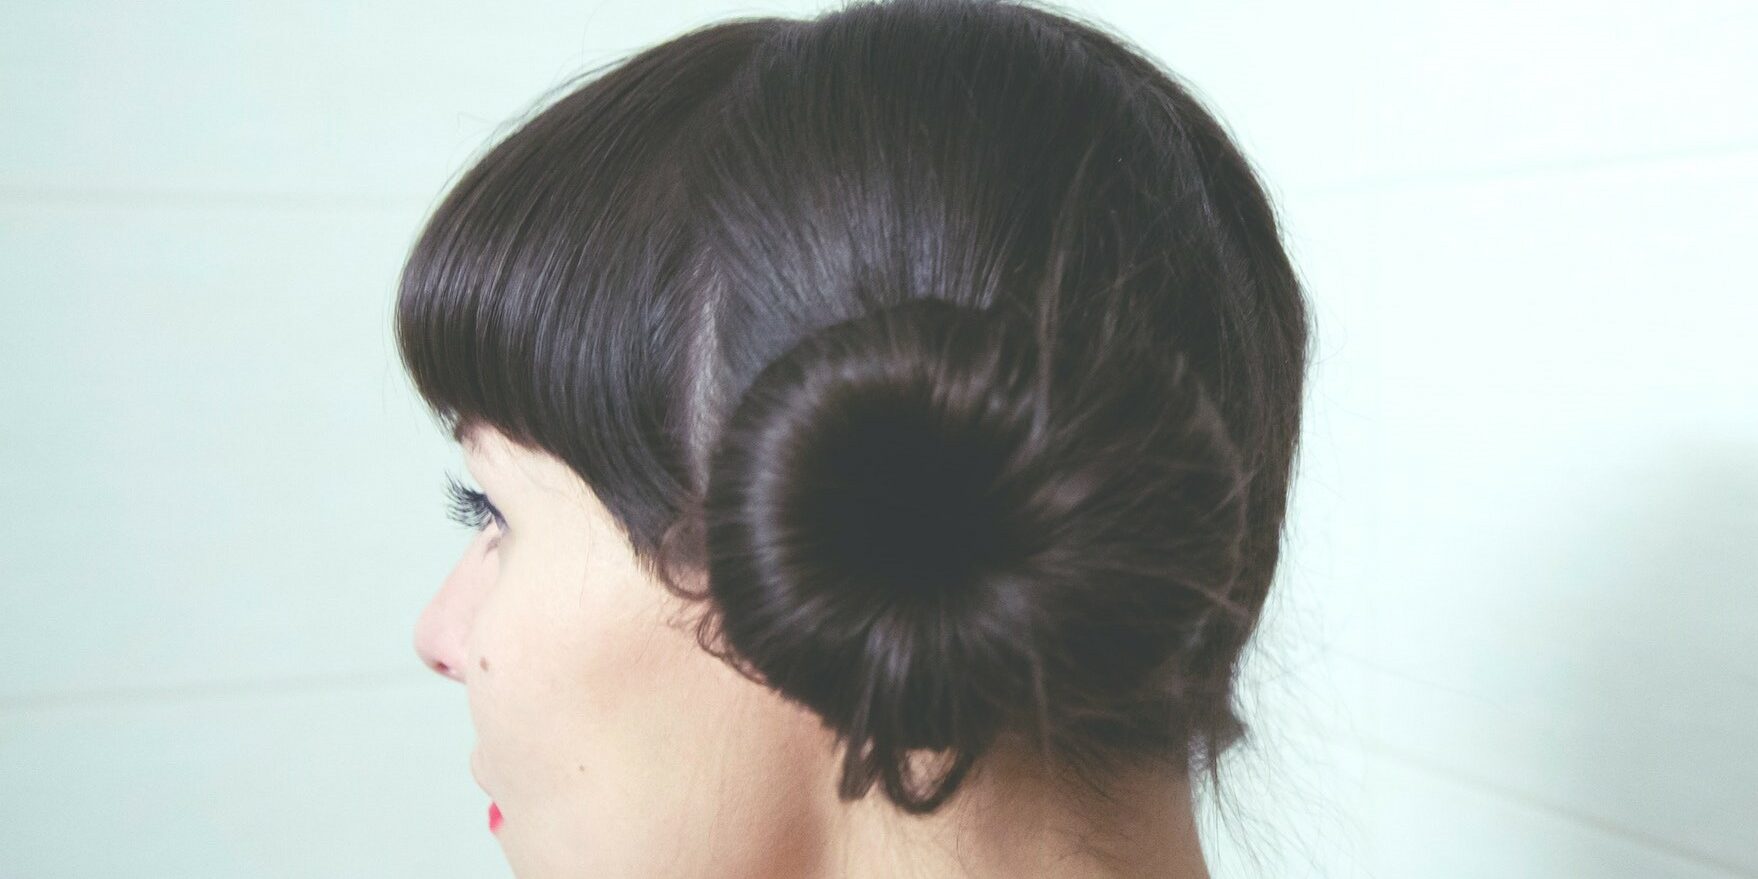 Macaron Buns Hairstyle: How to Style Macaron Buns | Reader's Digest